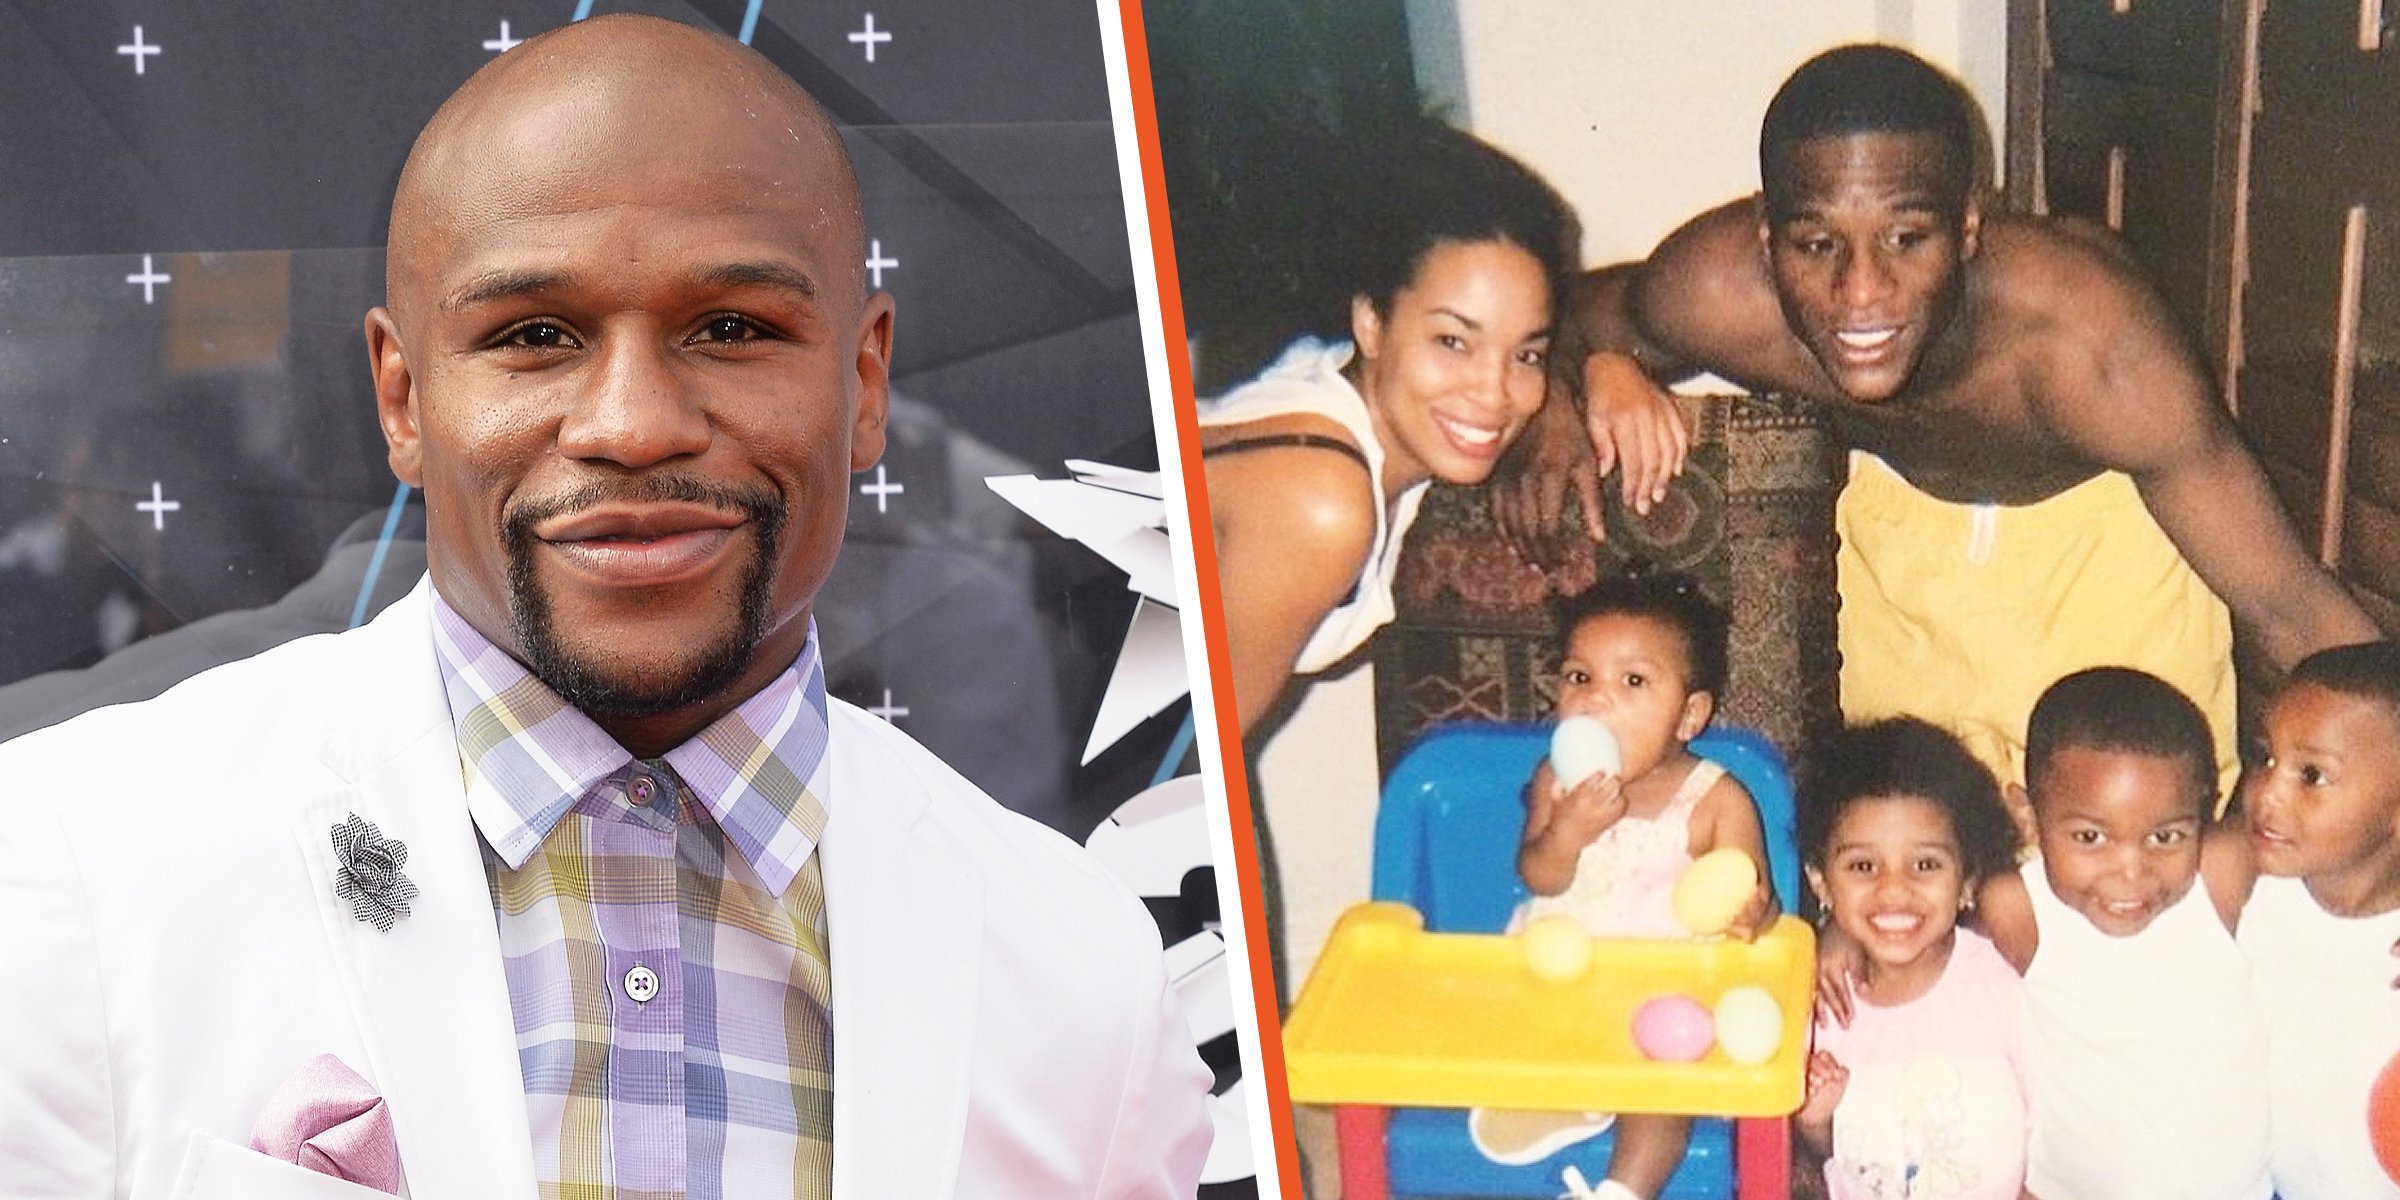 Floyd Mayweather Jr. and his family. | Source: Getty Images